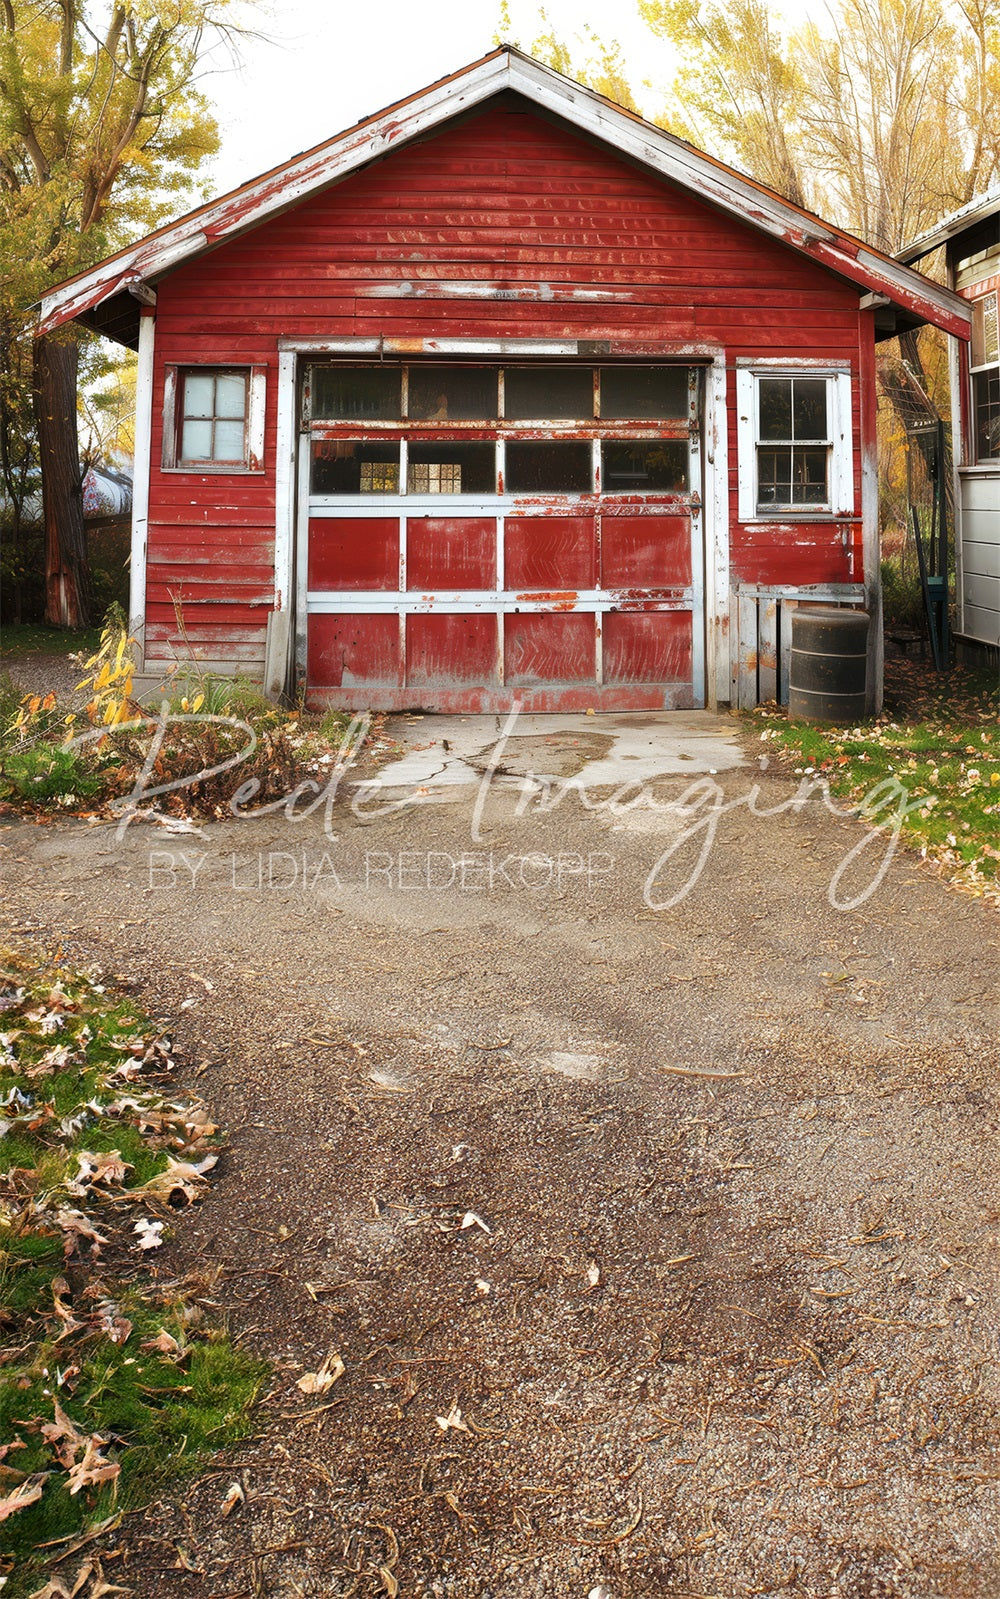 TEST Kate Sweep Autumn Outdoor Forest Red Old Garage Backdrop Designed by Lidia Redekopp